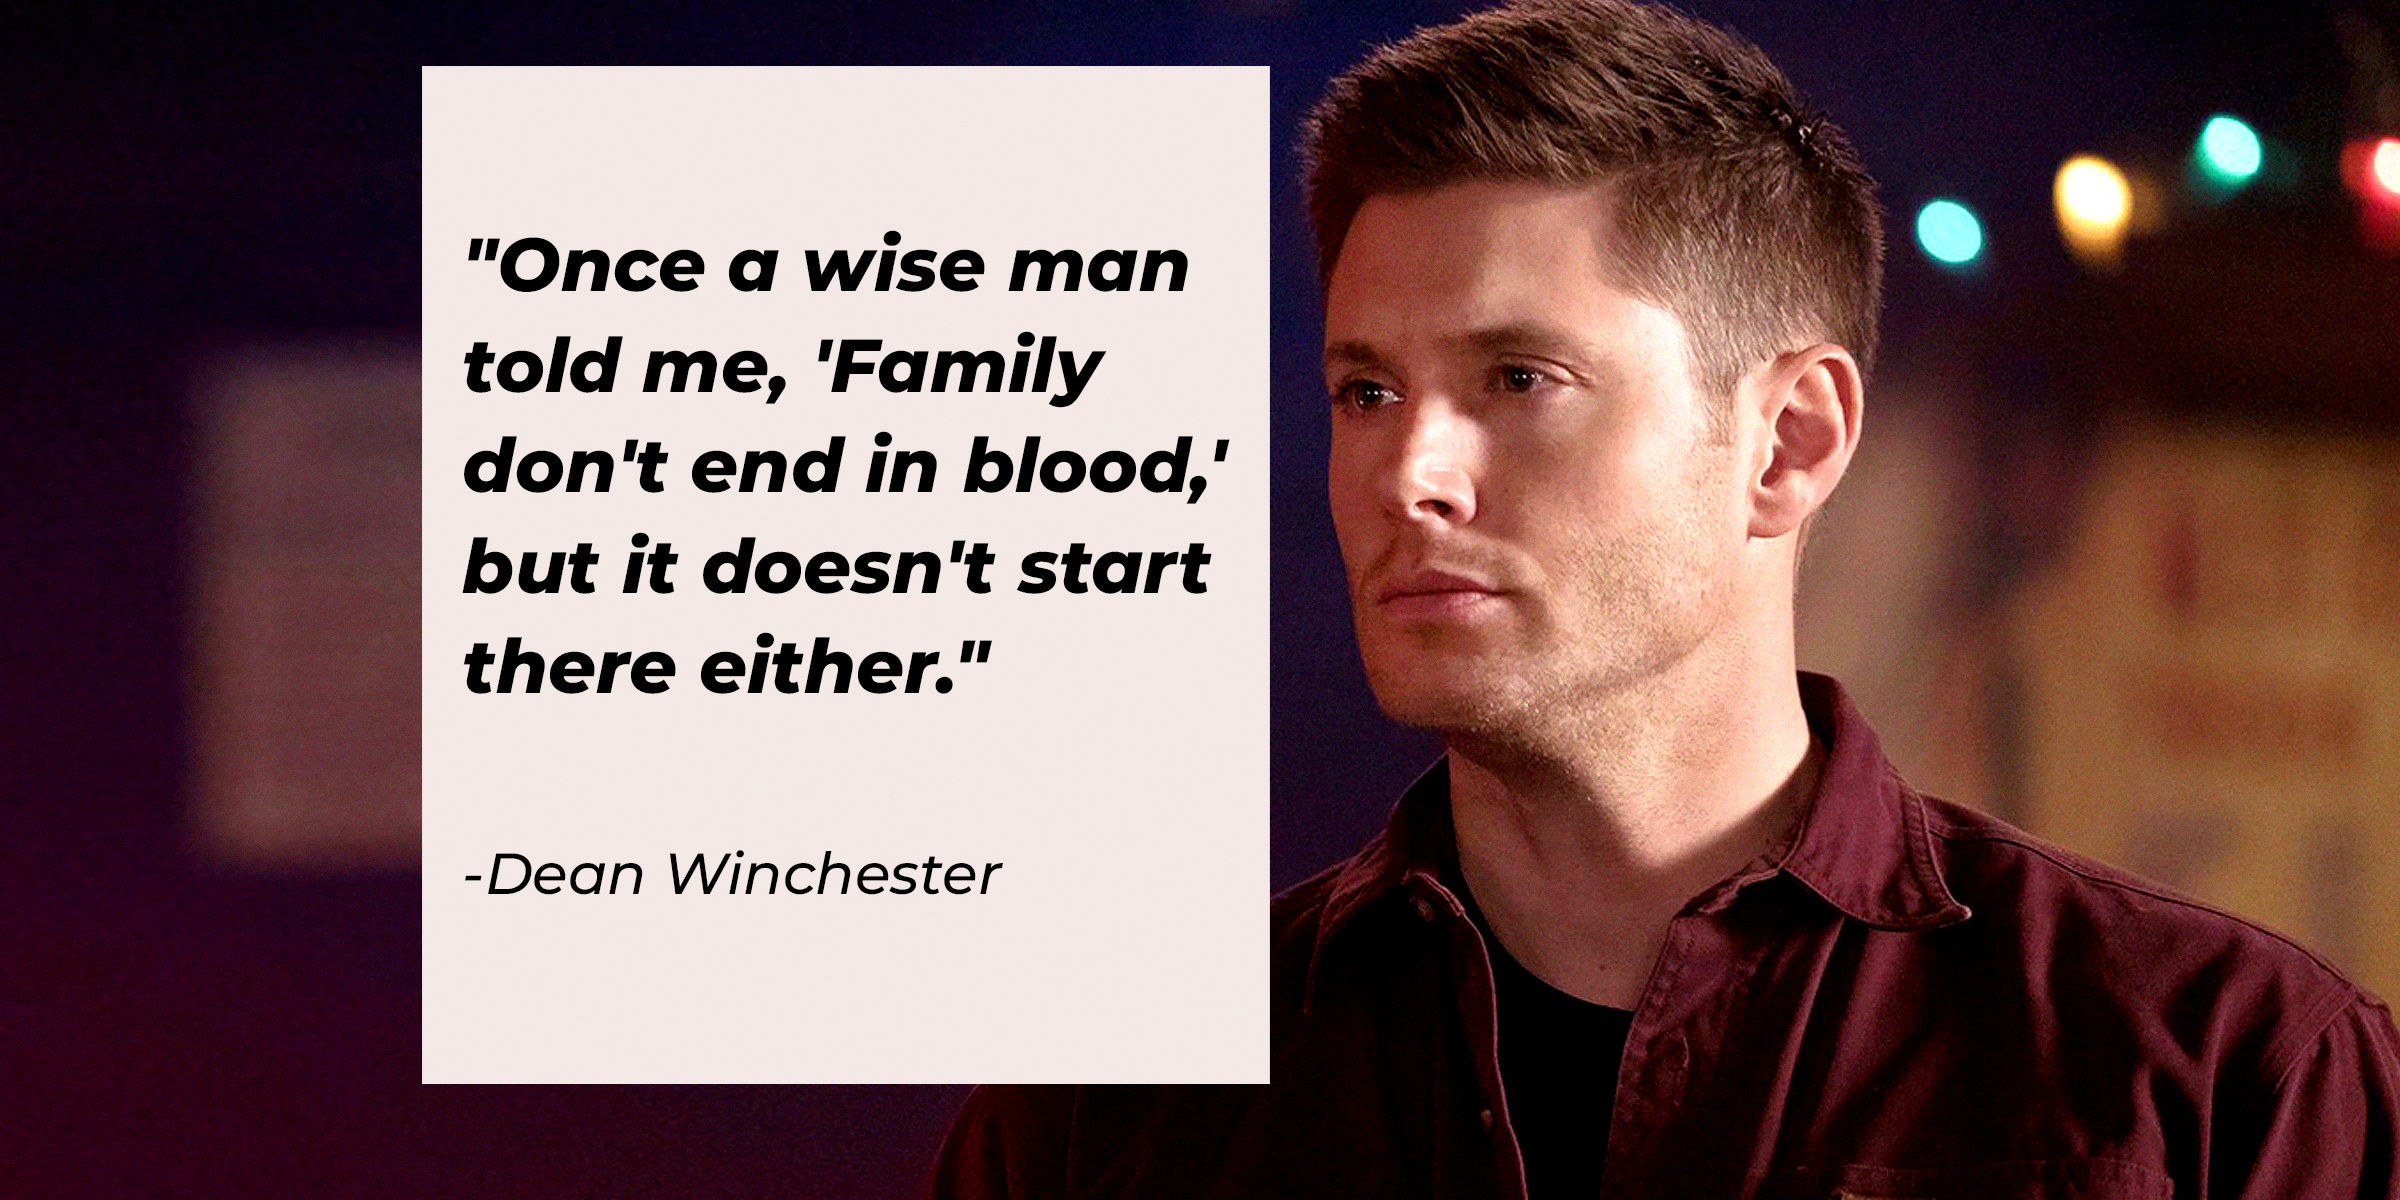 Dean Winchester with His Quote, "Once a Wise Man Told Me, 'Family Don't End in Blood,' but It Doesn't Start There Either." | Source: Facebook/Supernatural